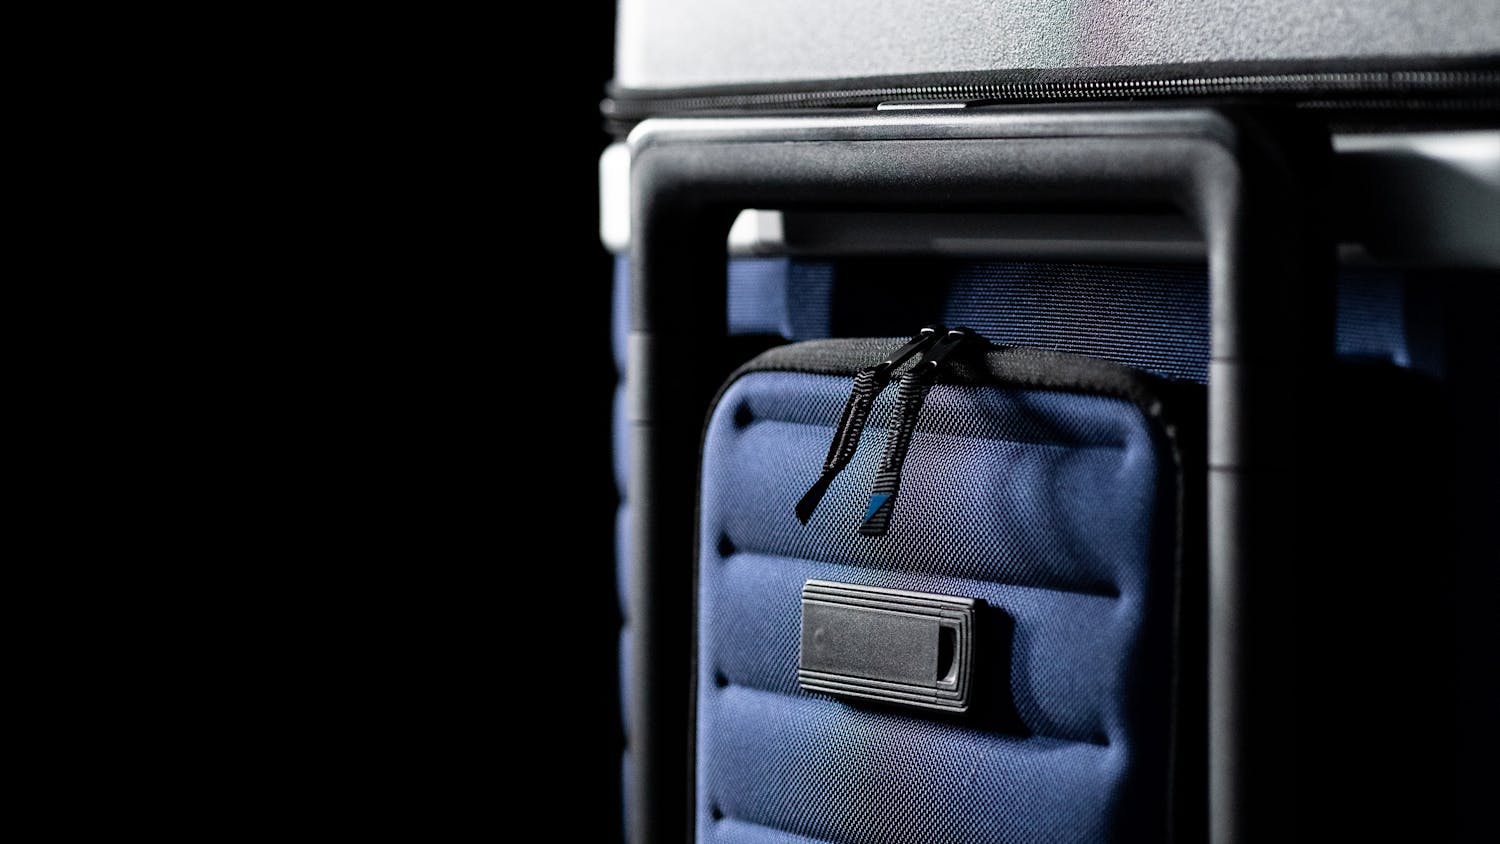 Pull Up Suitcase - Your mobile closet